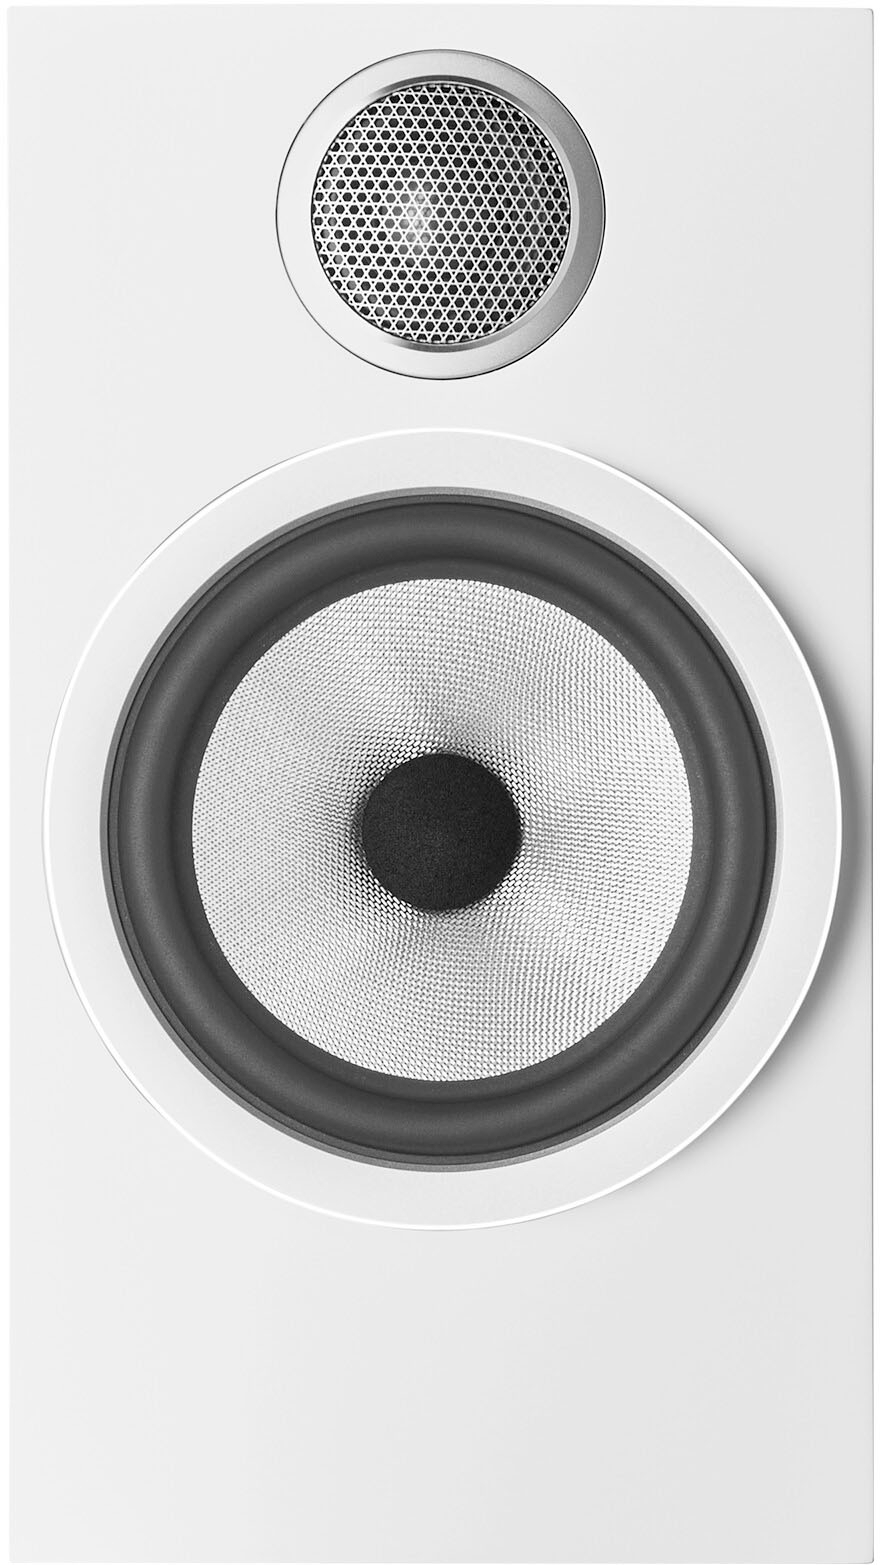 Bowers wilkins • Compare (76 products) see prices »